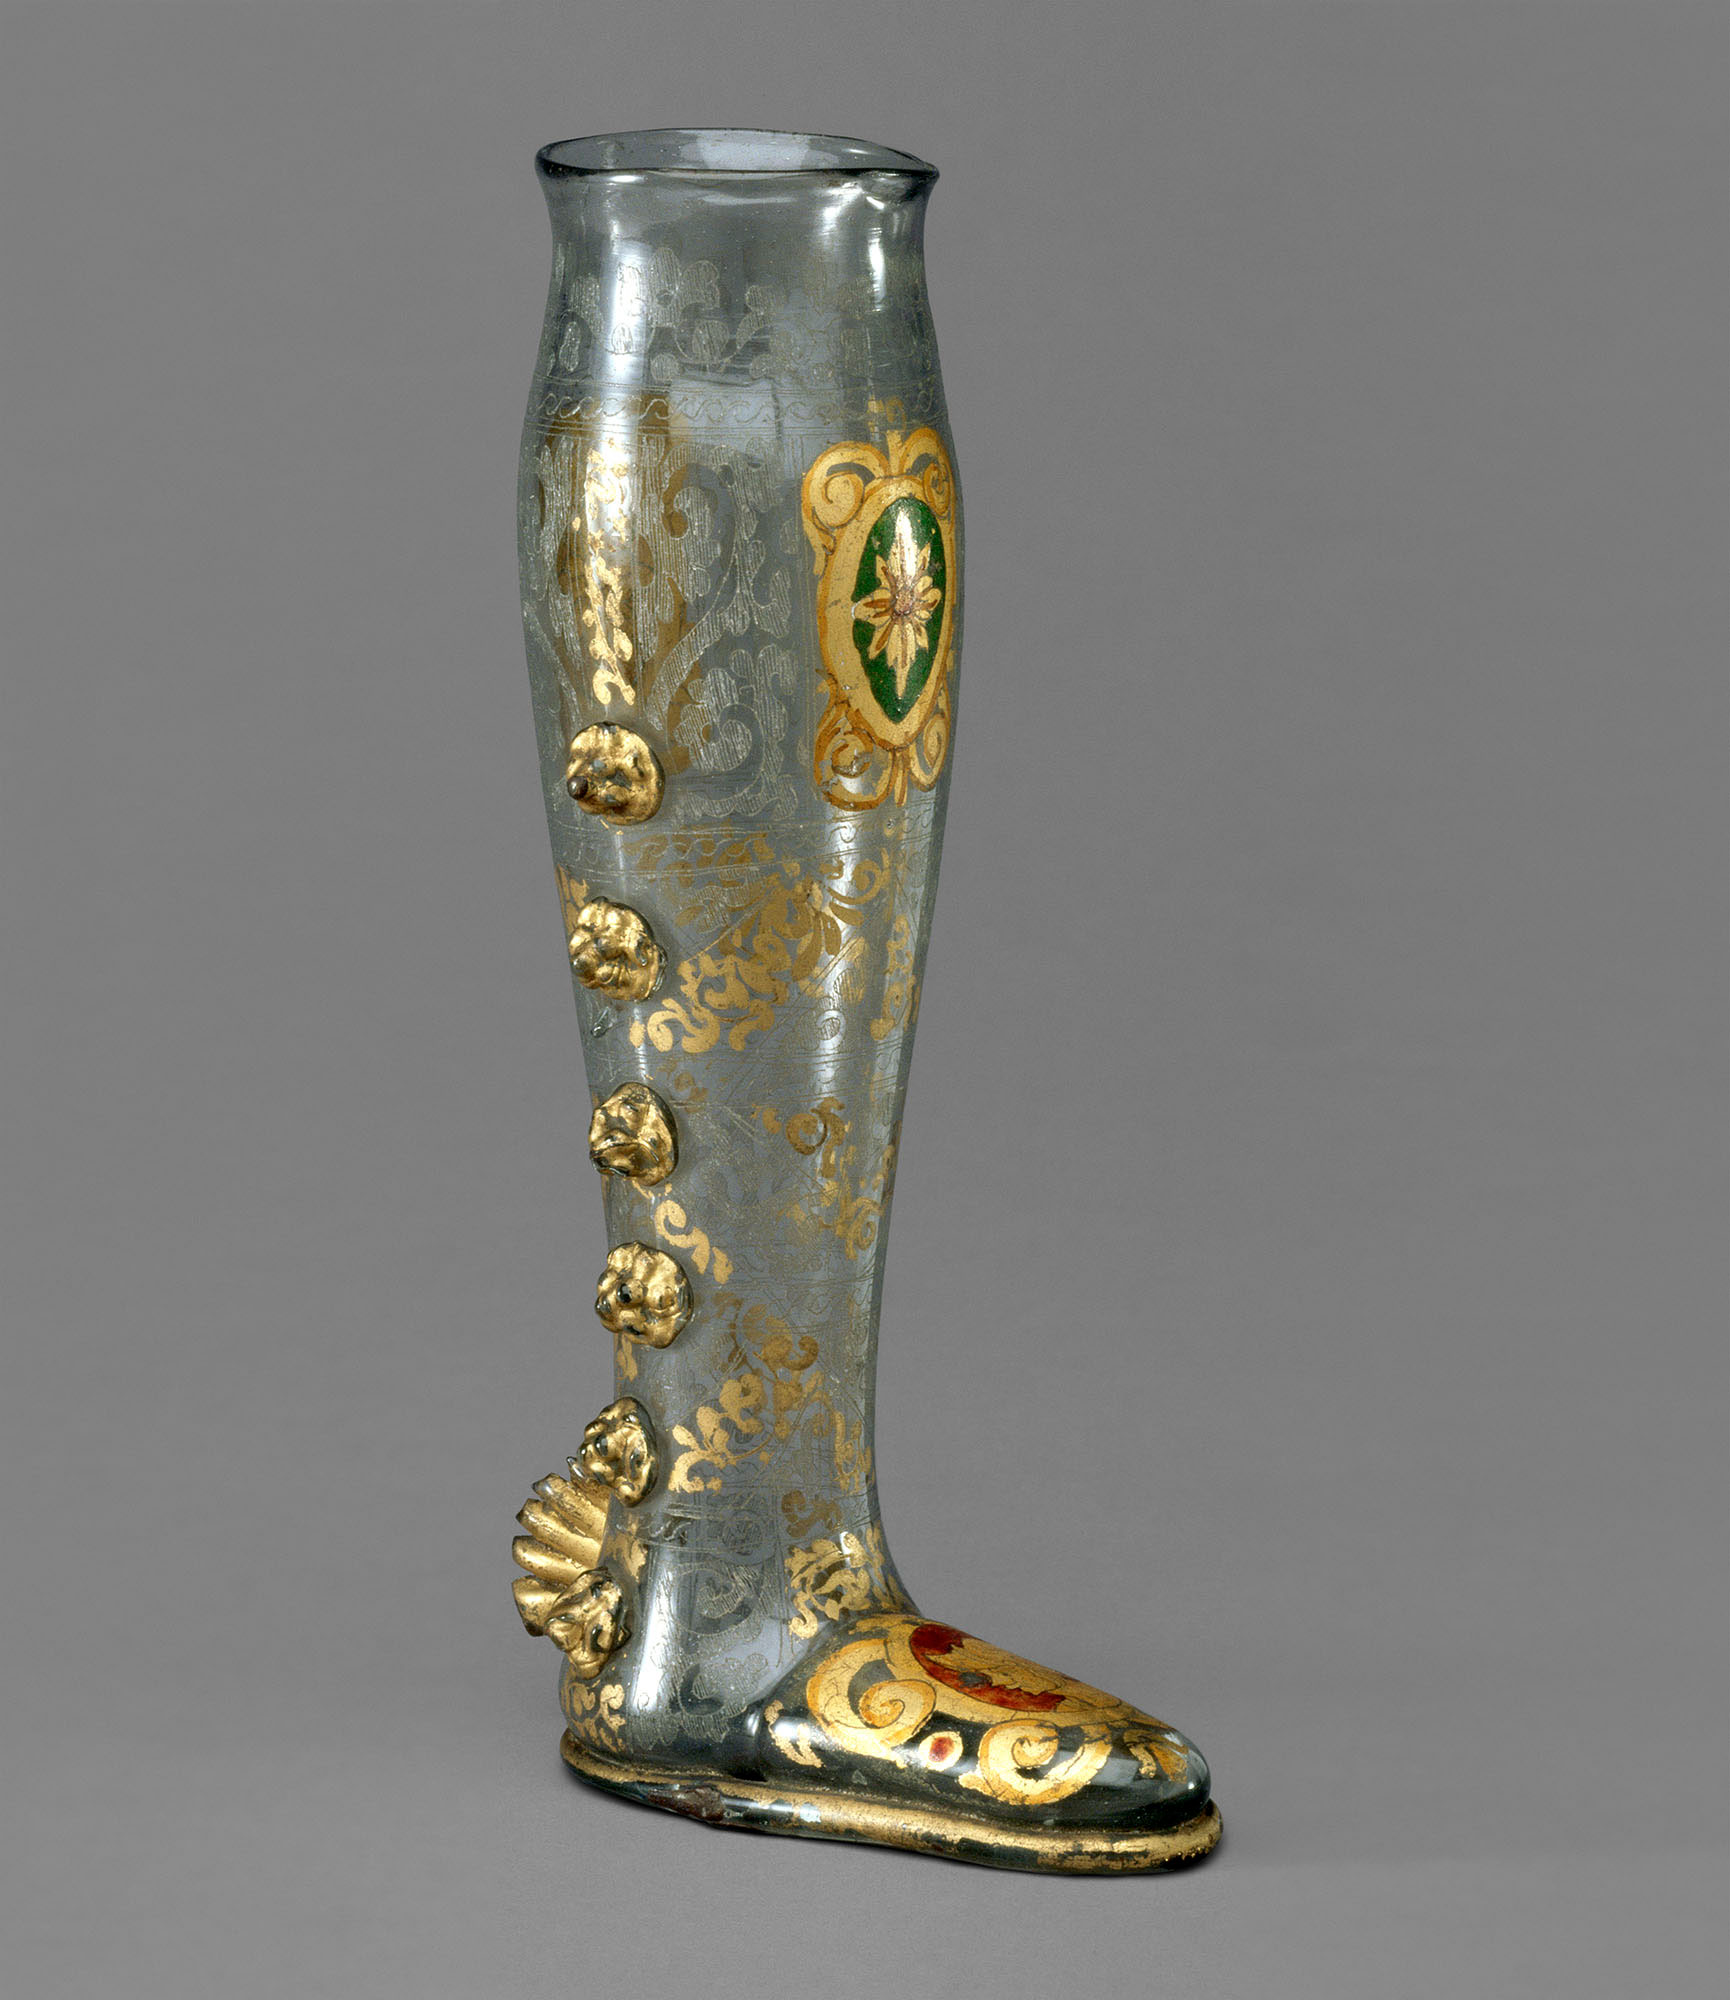 Glass boot-shaped vessel with gold decorations